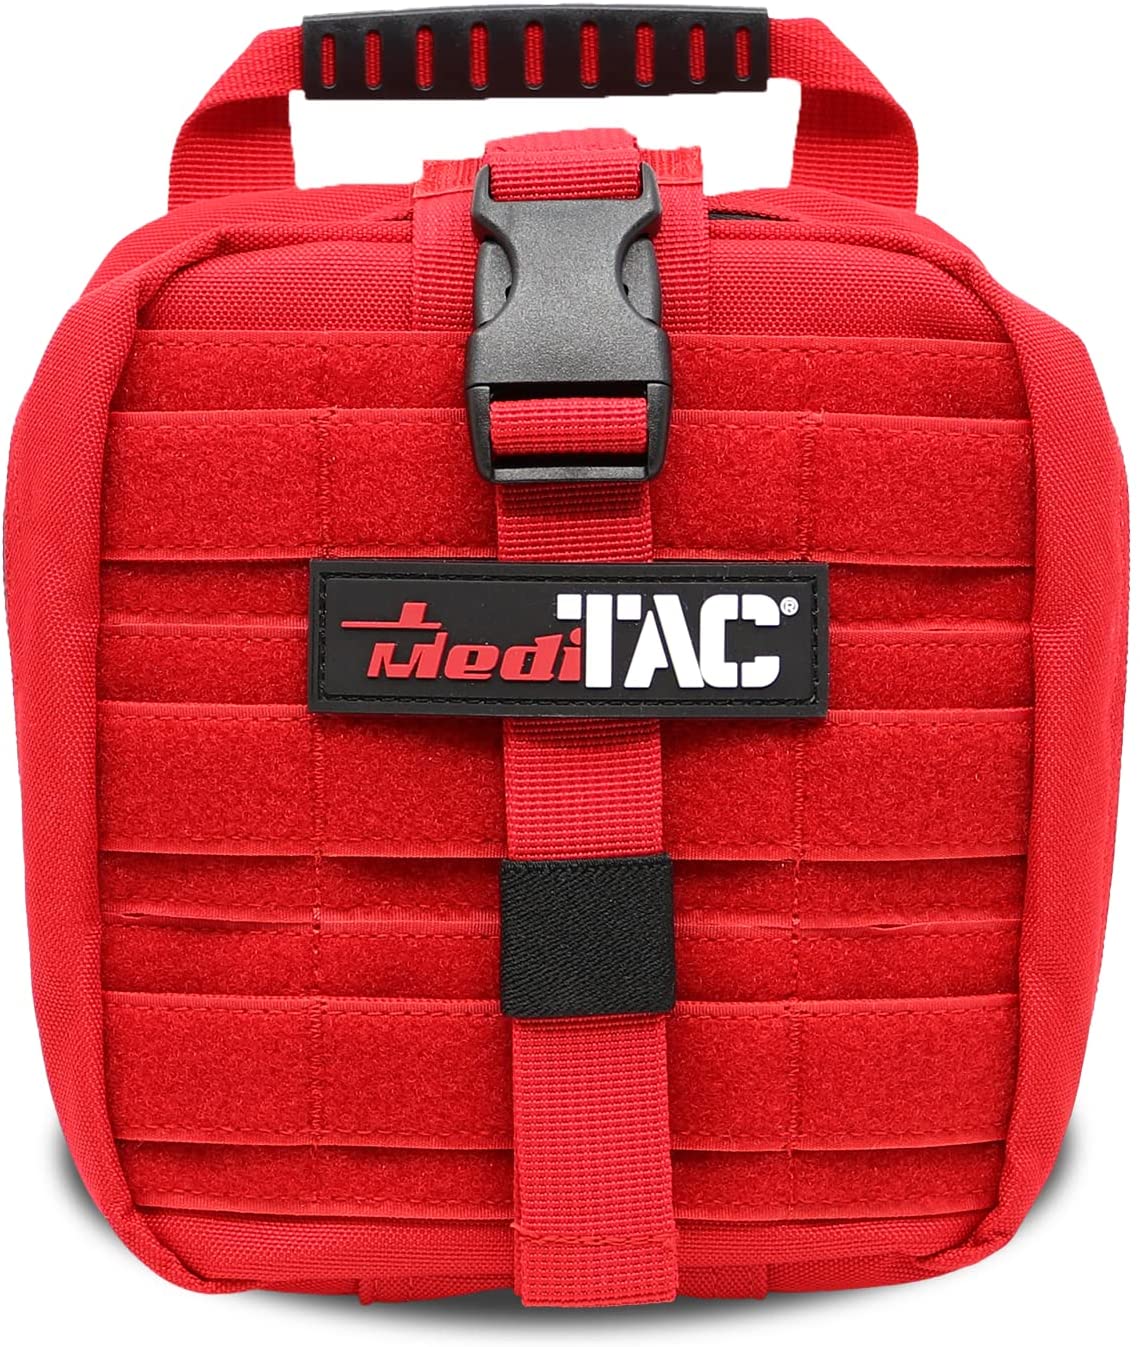 MediTac Small Owl Type Tactical Trauma Bag feat. Rip-Away Velcro Fastener Bag Backpack, Molle Bag Rucksack Pack Red